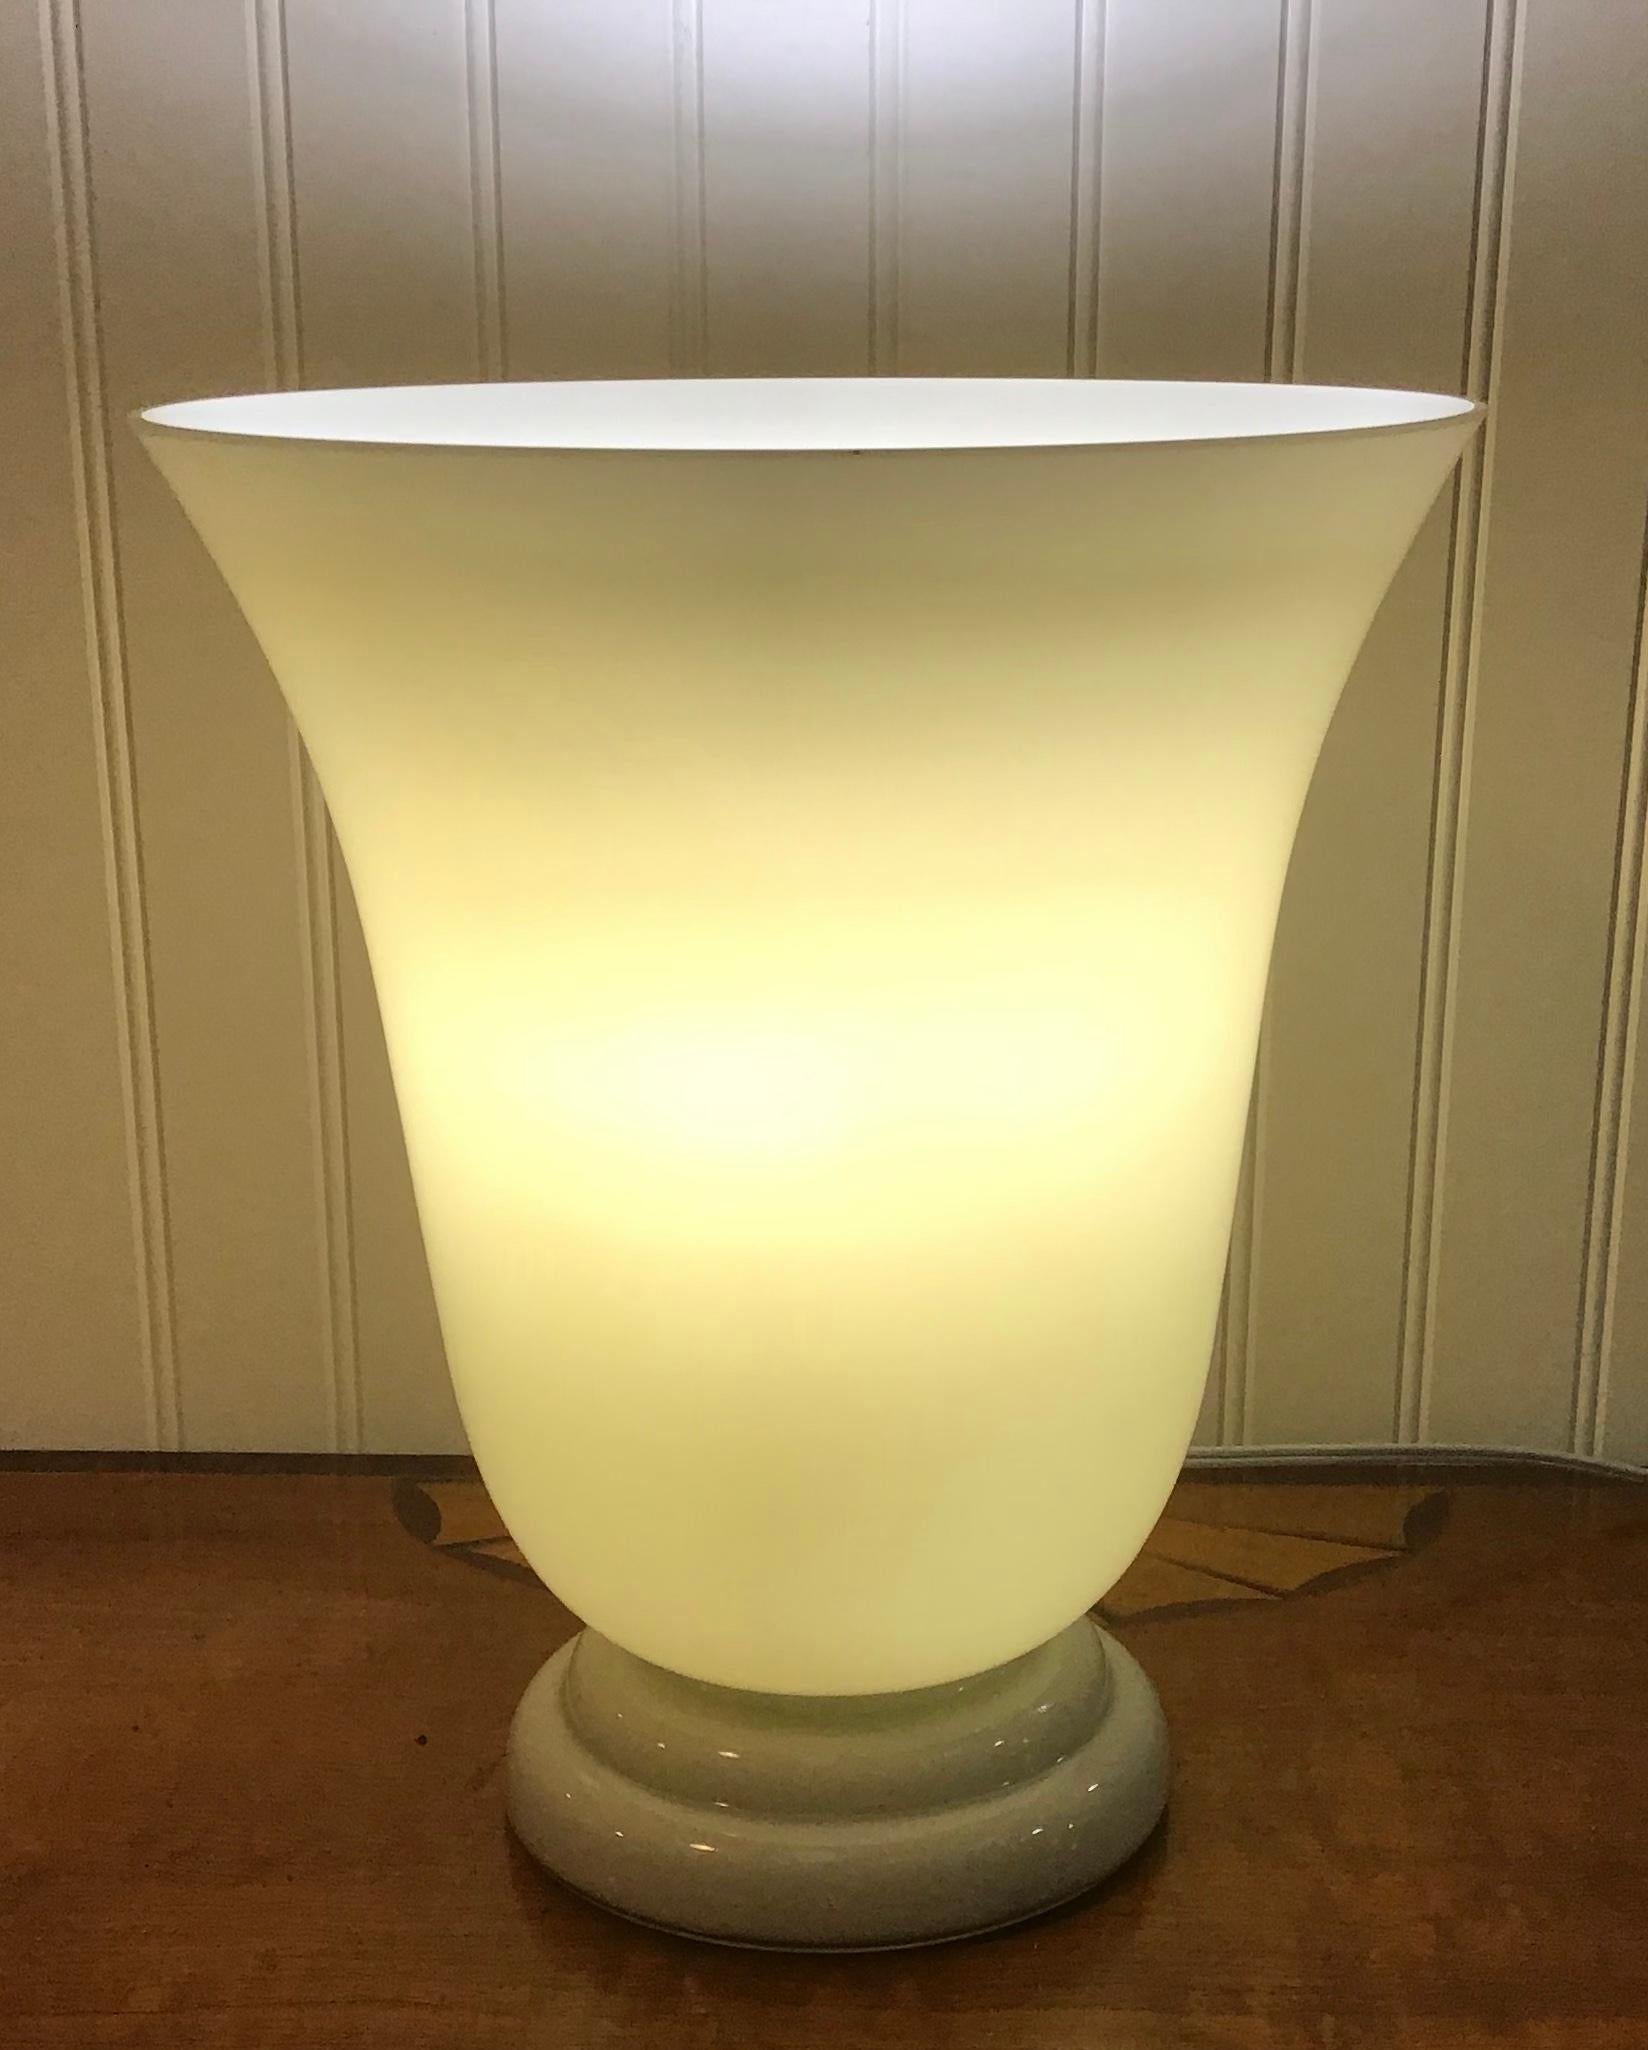 Urn shaped cased glass torchère lamp in the French Art Deco style
cream color exterior with white interior
Measures: 11 3/4 inches high
10 inch wide at top
5 3/4 inch base.